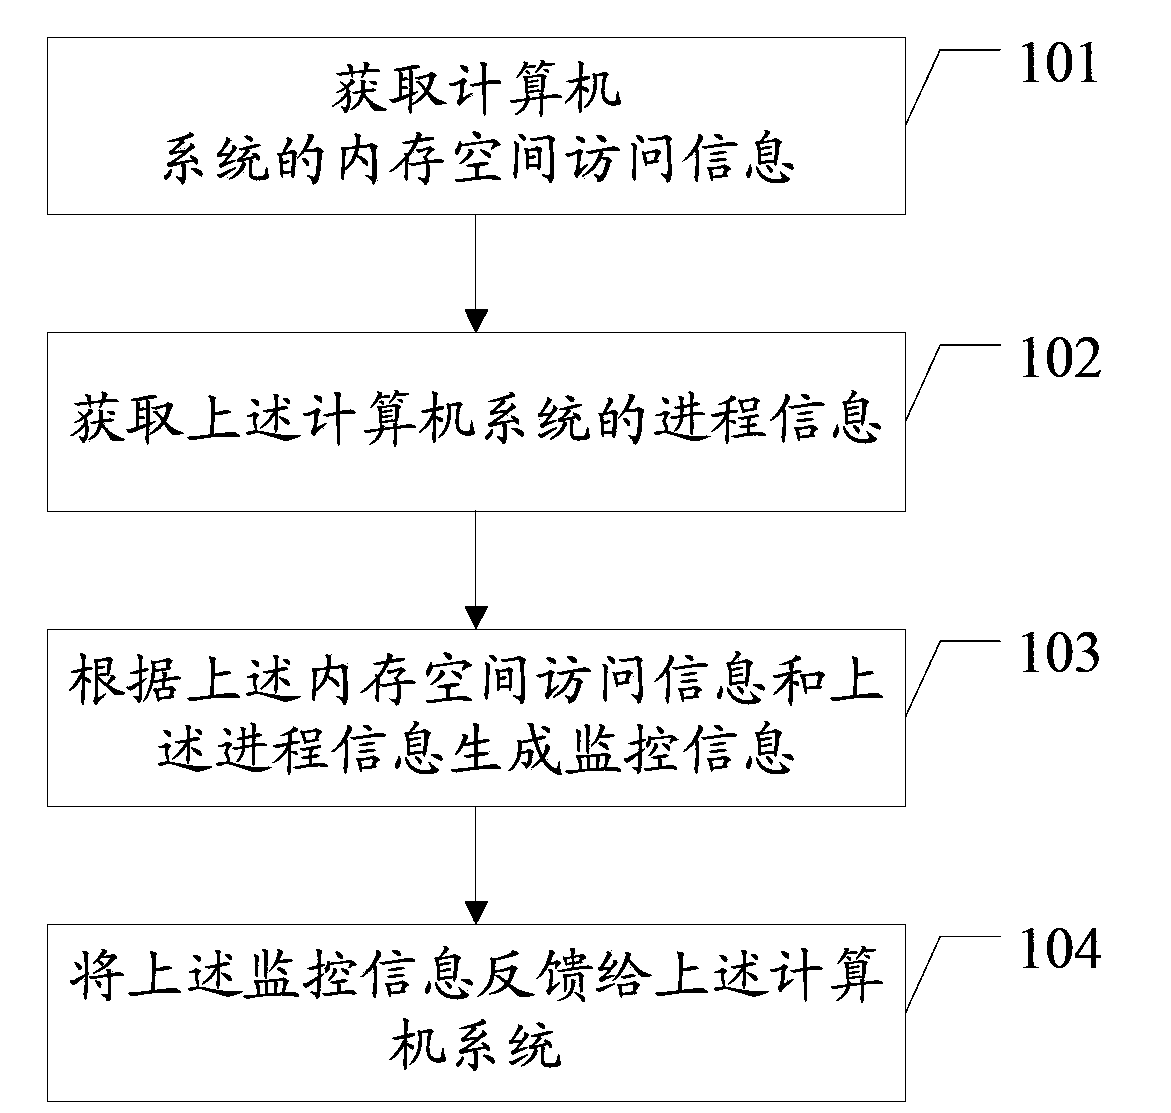 Memory monitoring method and related device